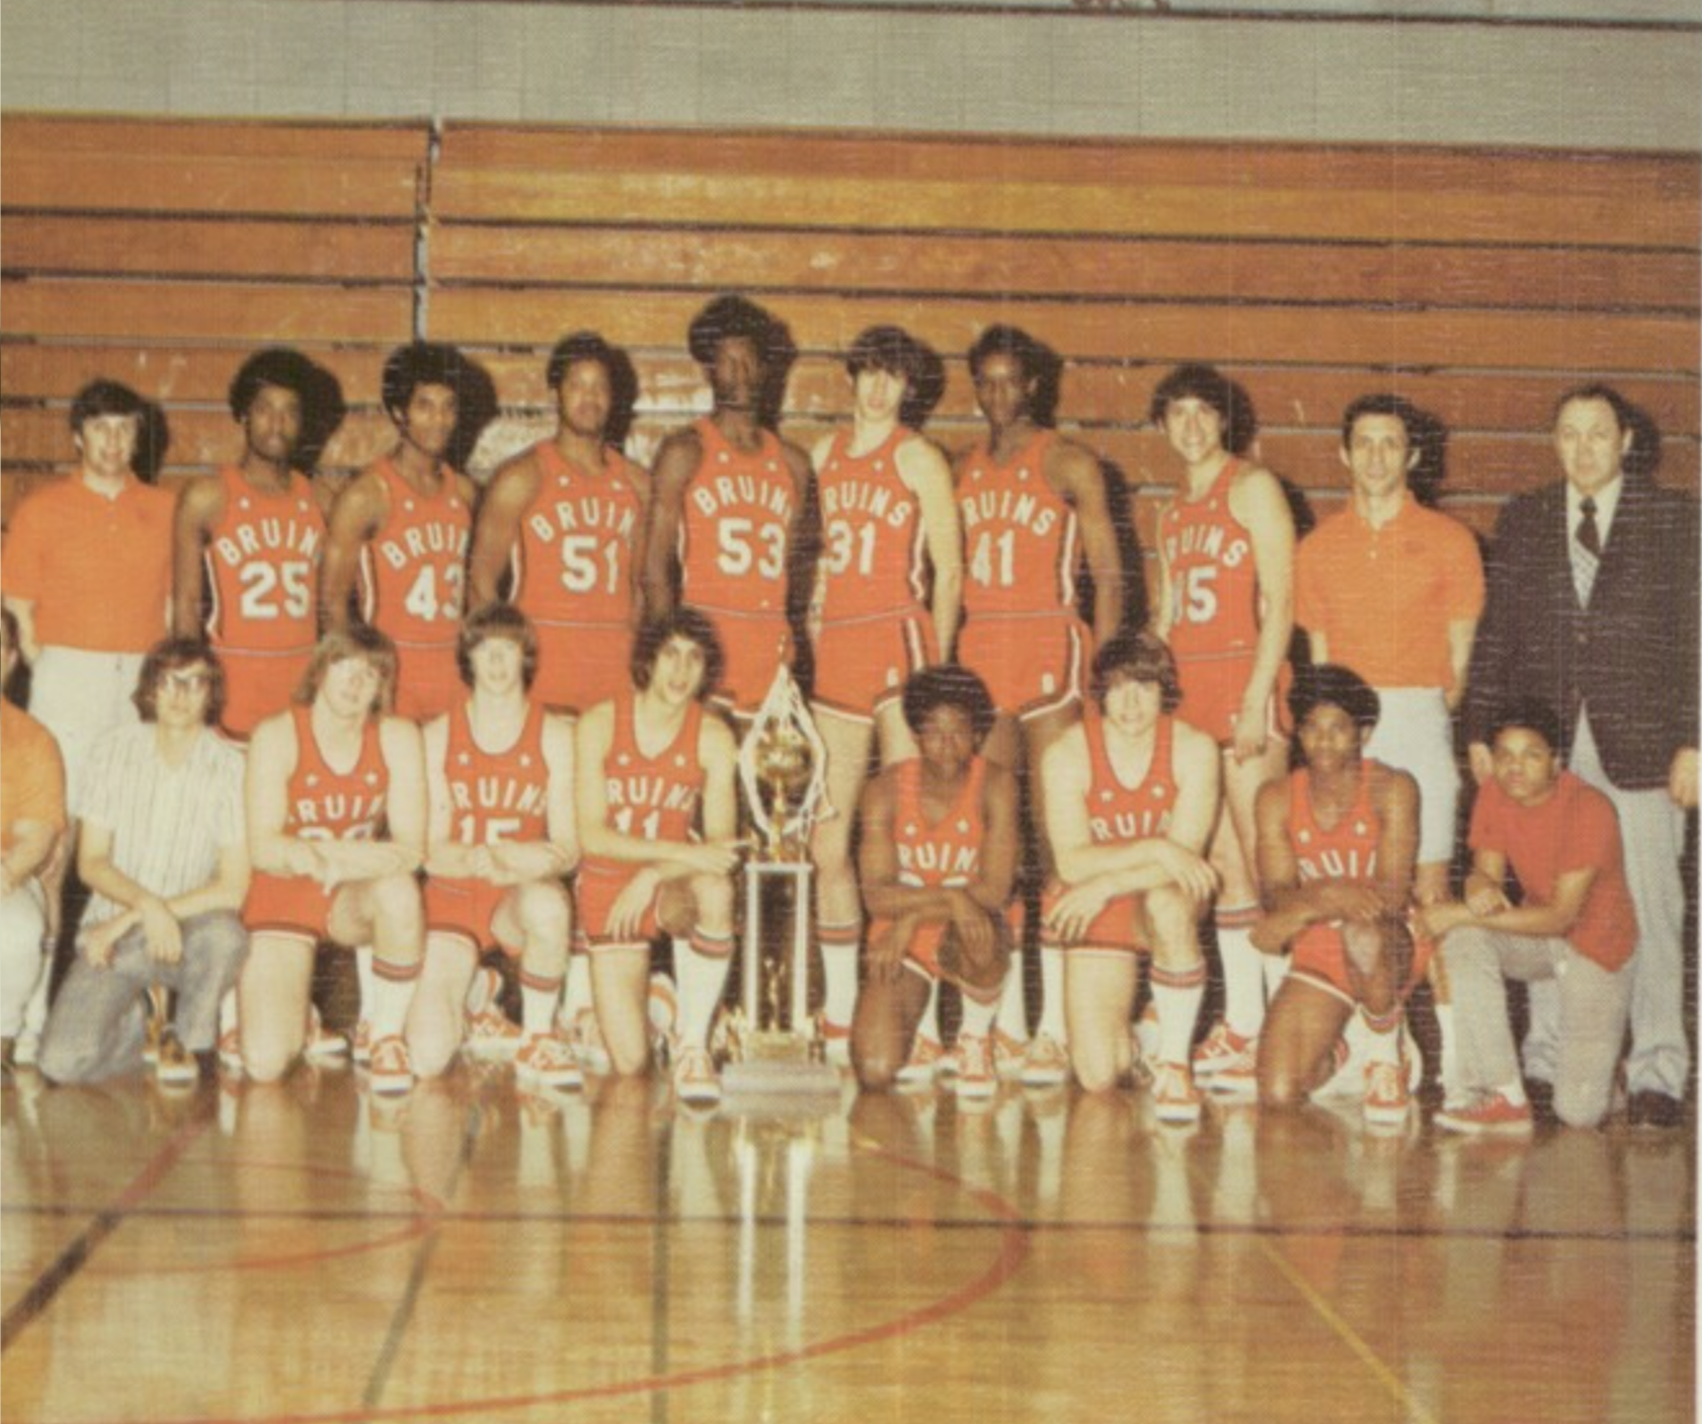 Win One More in '74: 50th anniversary of Northrop's state basketball title